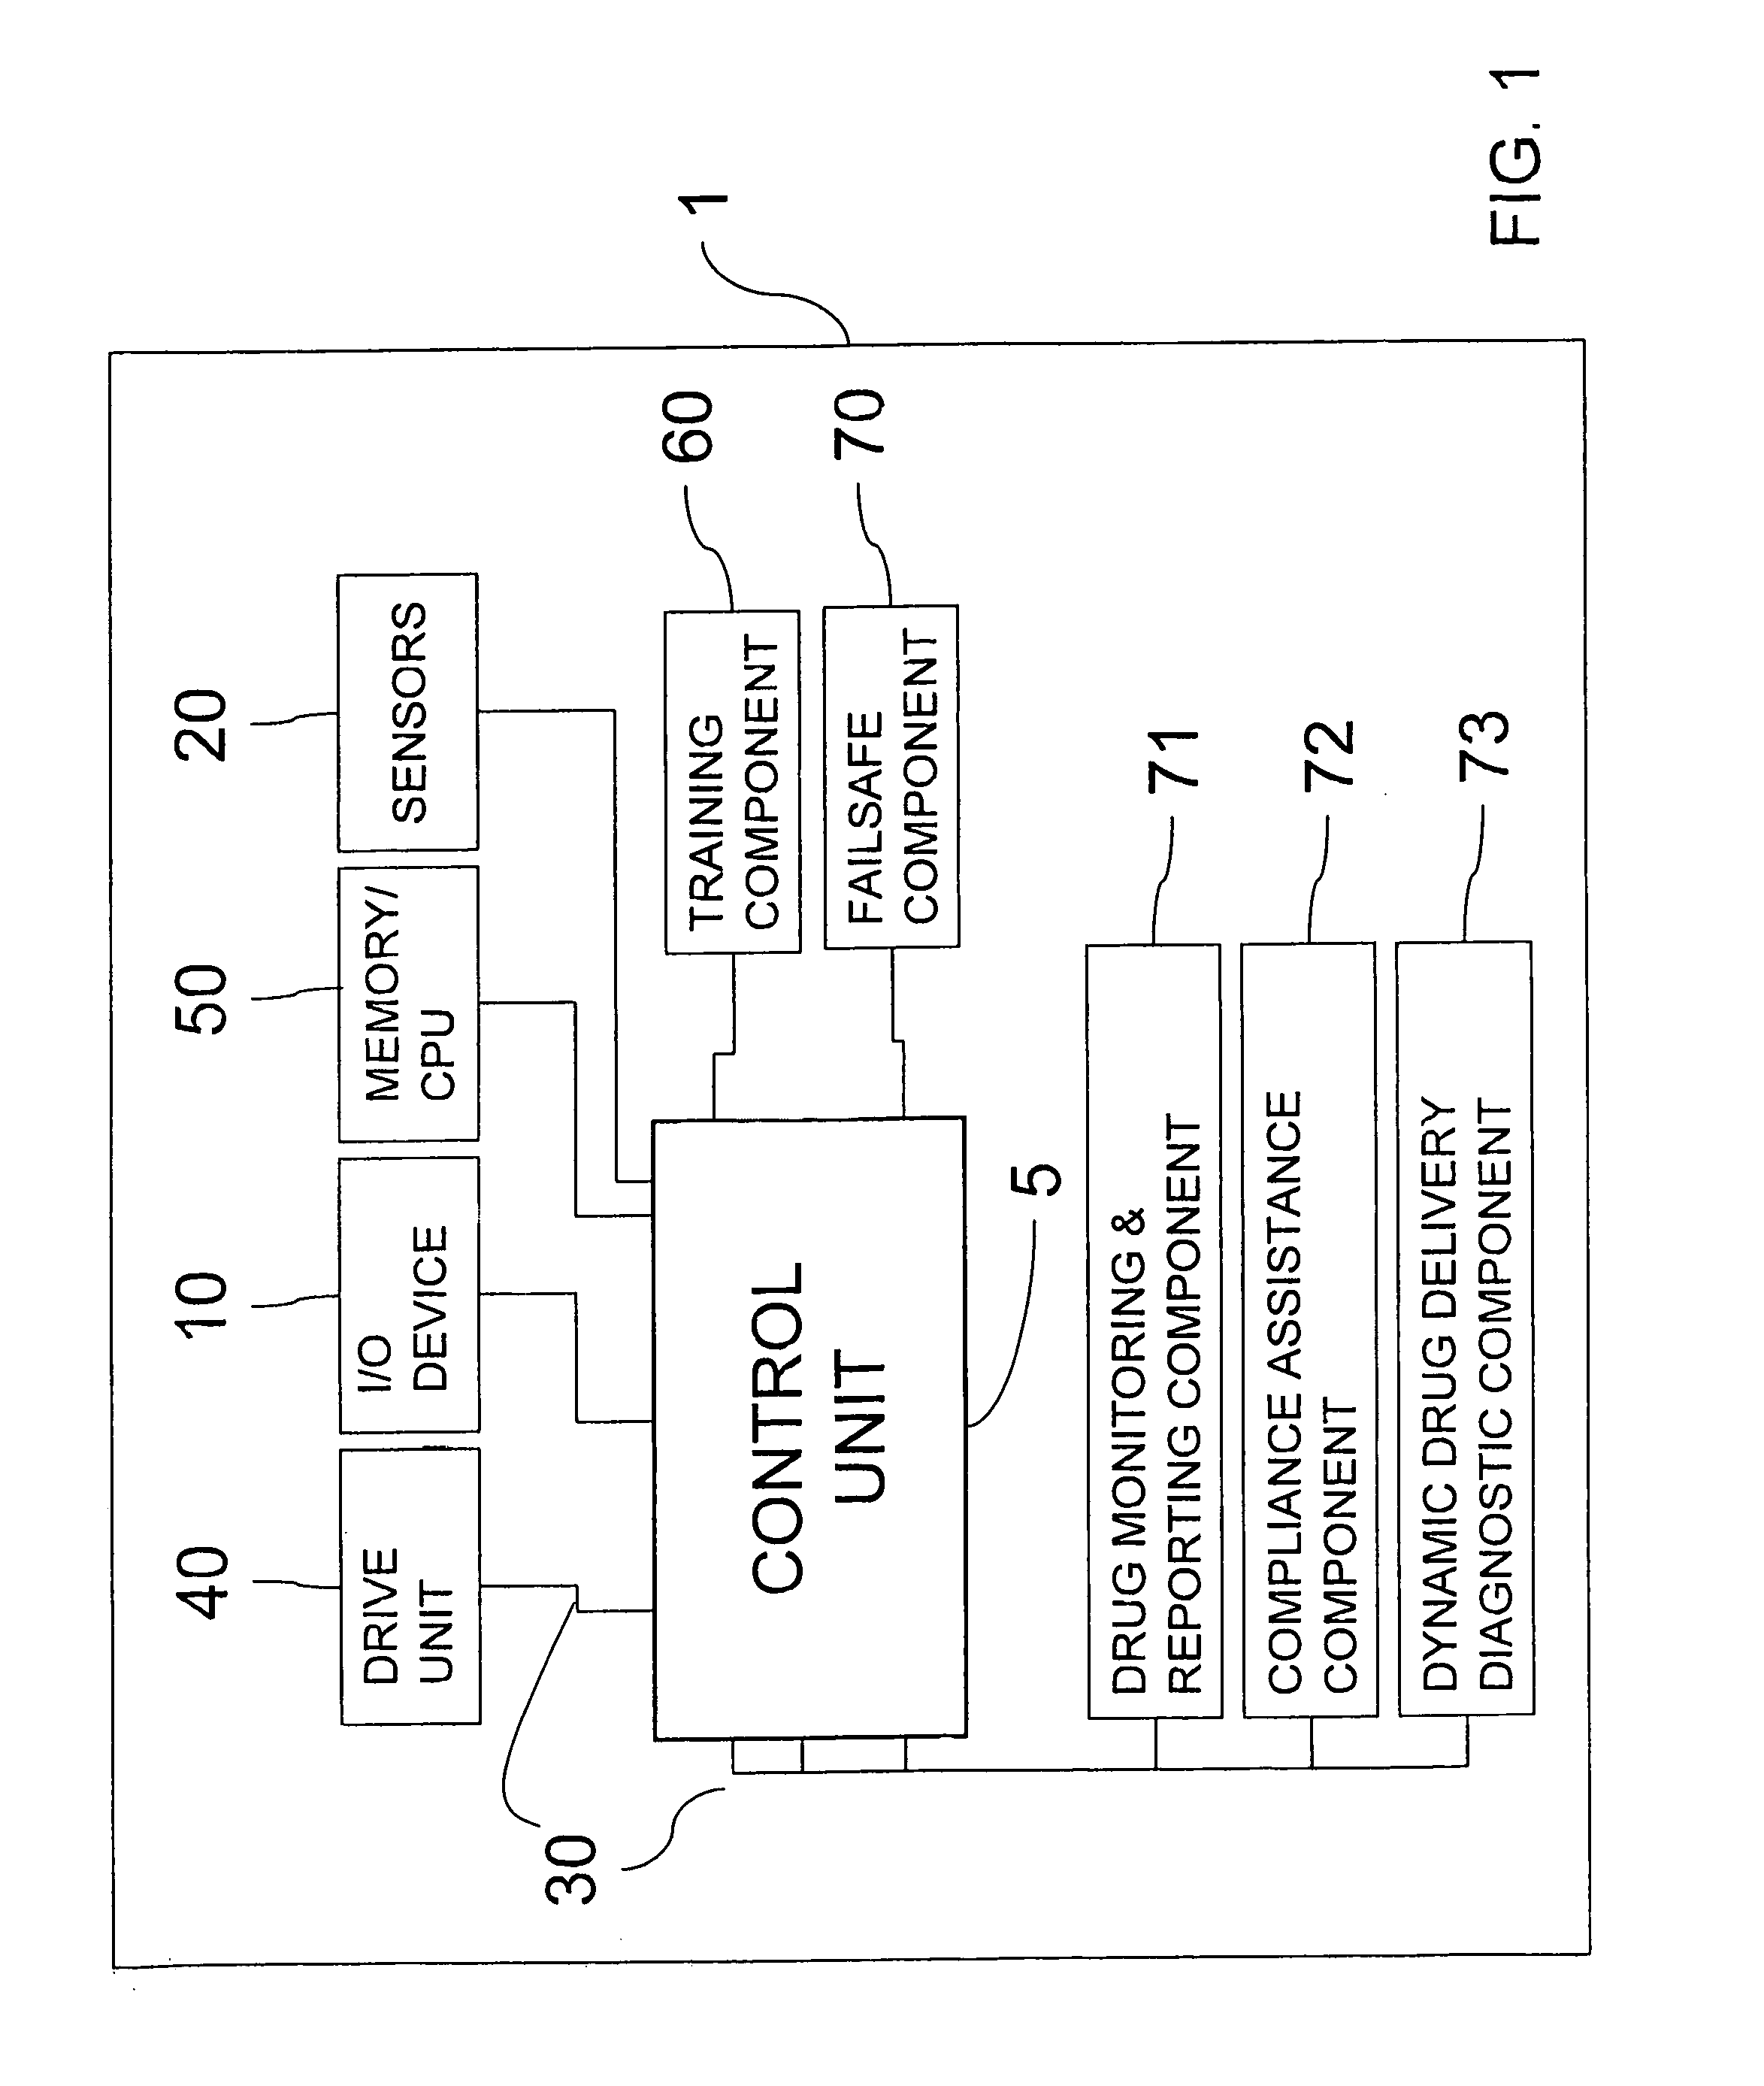 Self-administration injection system